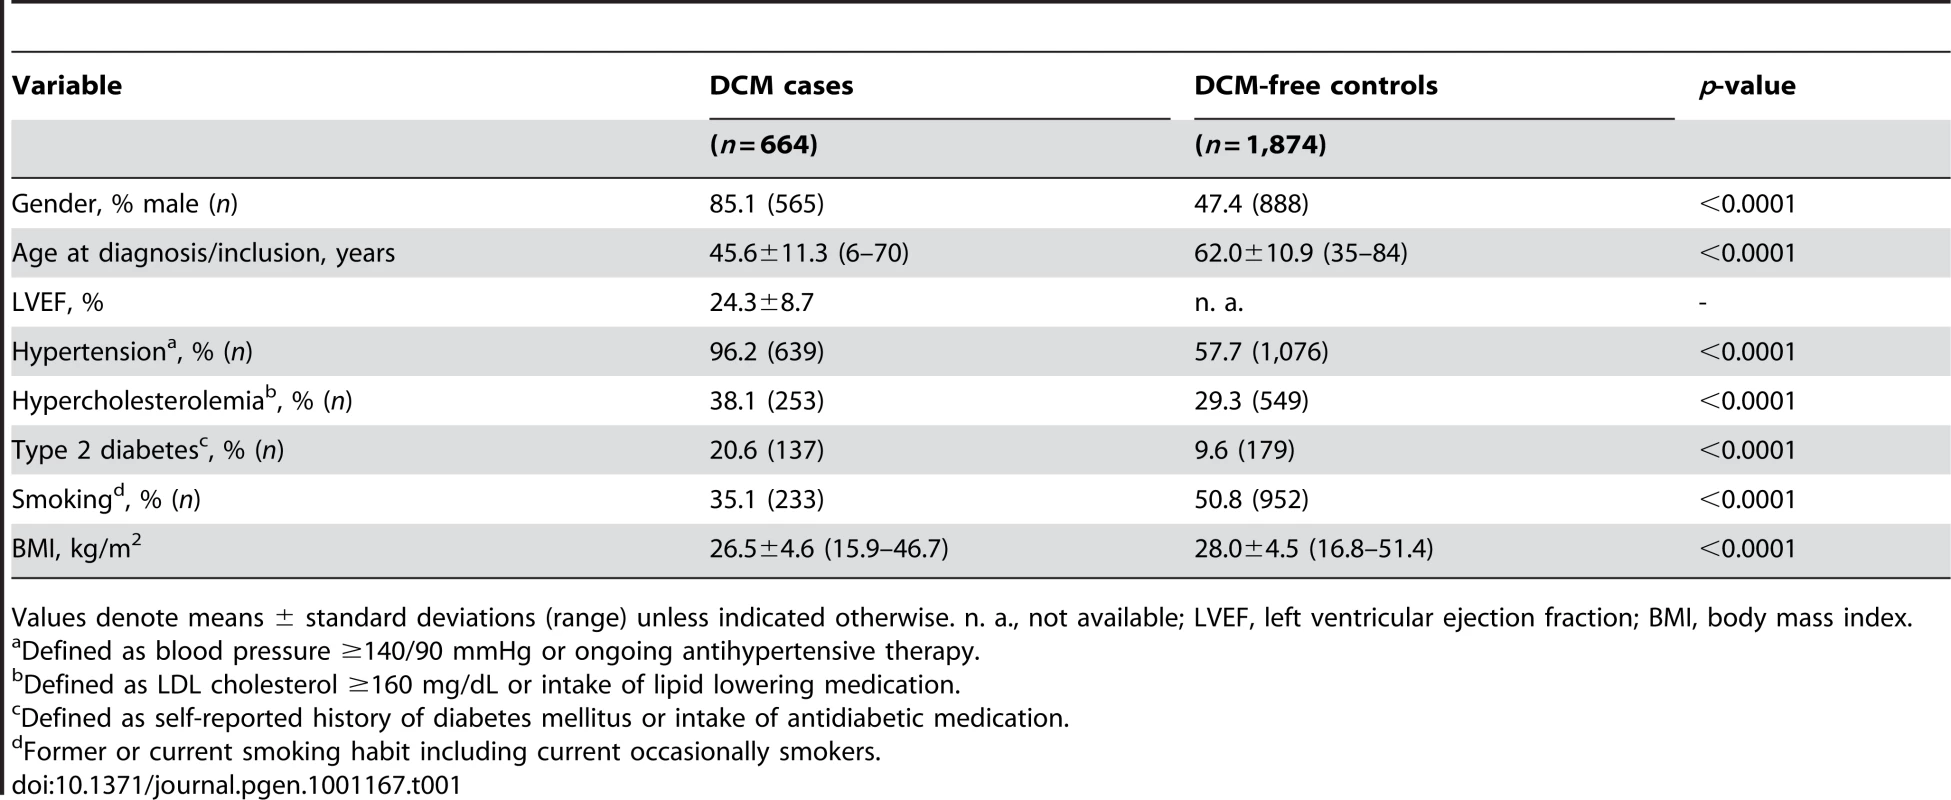 Characteristics of DCM cases and controls used for initial screening.